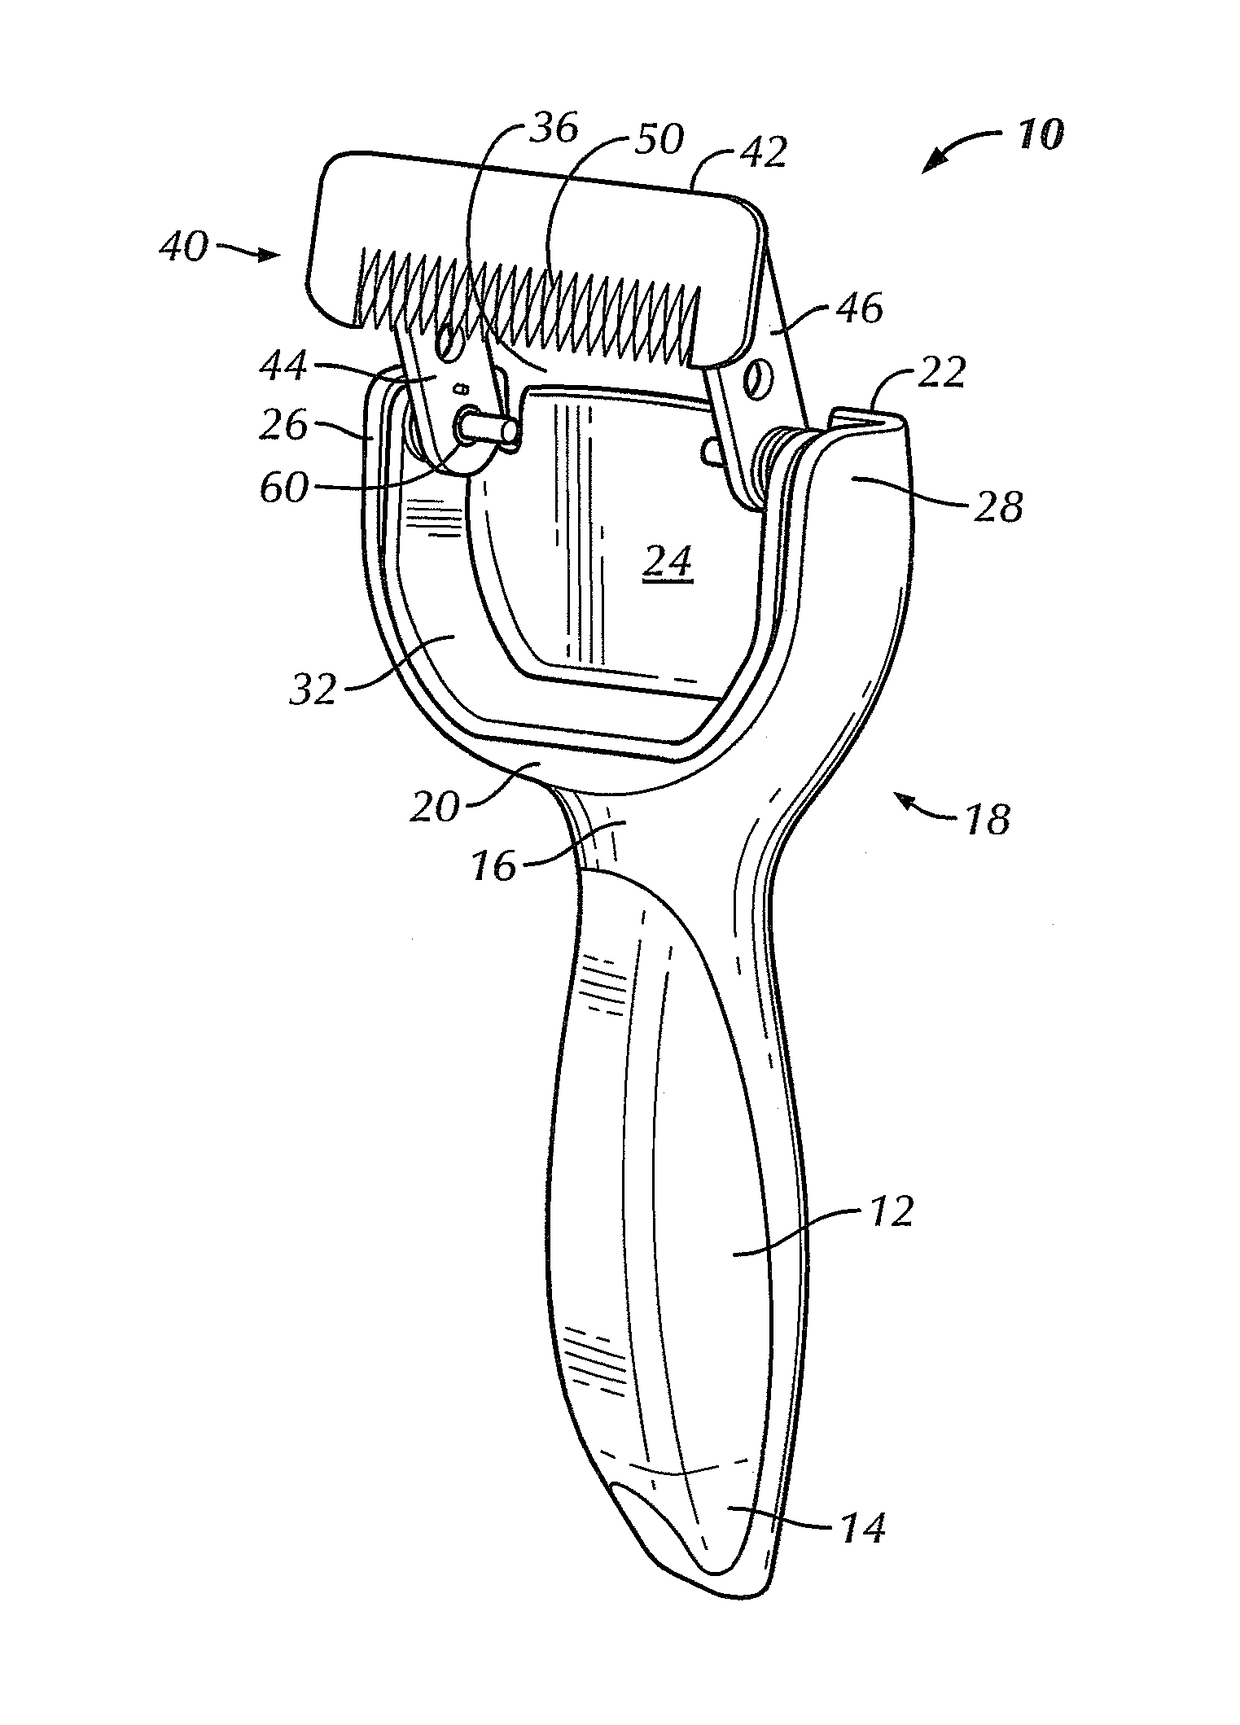 Grooming tool and method of removing hair from a pet associated therewith